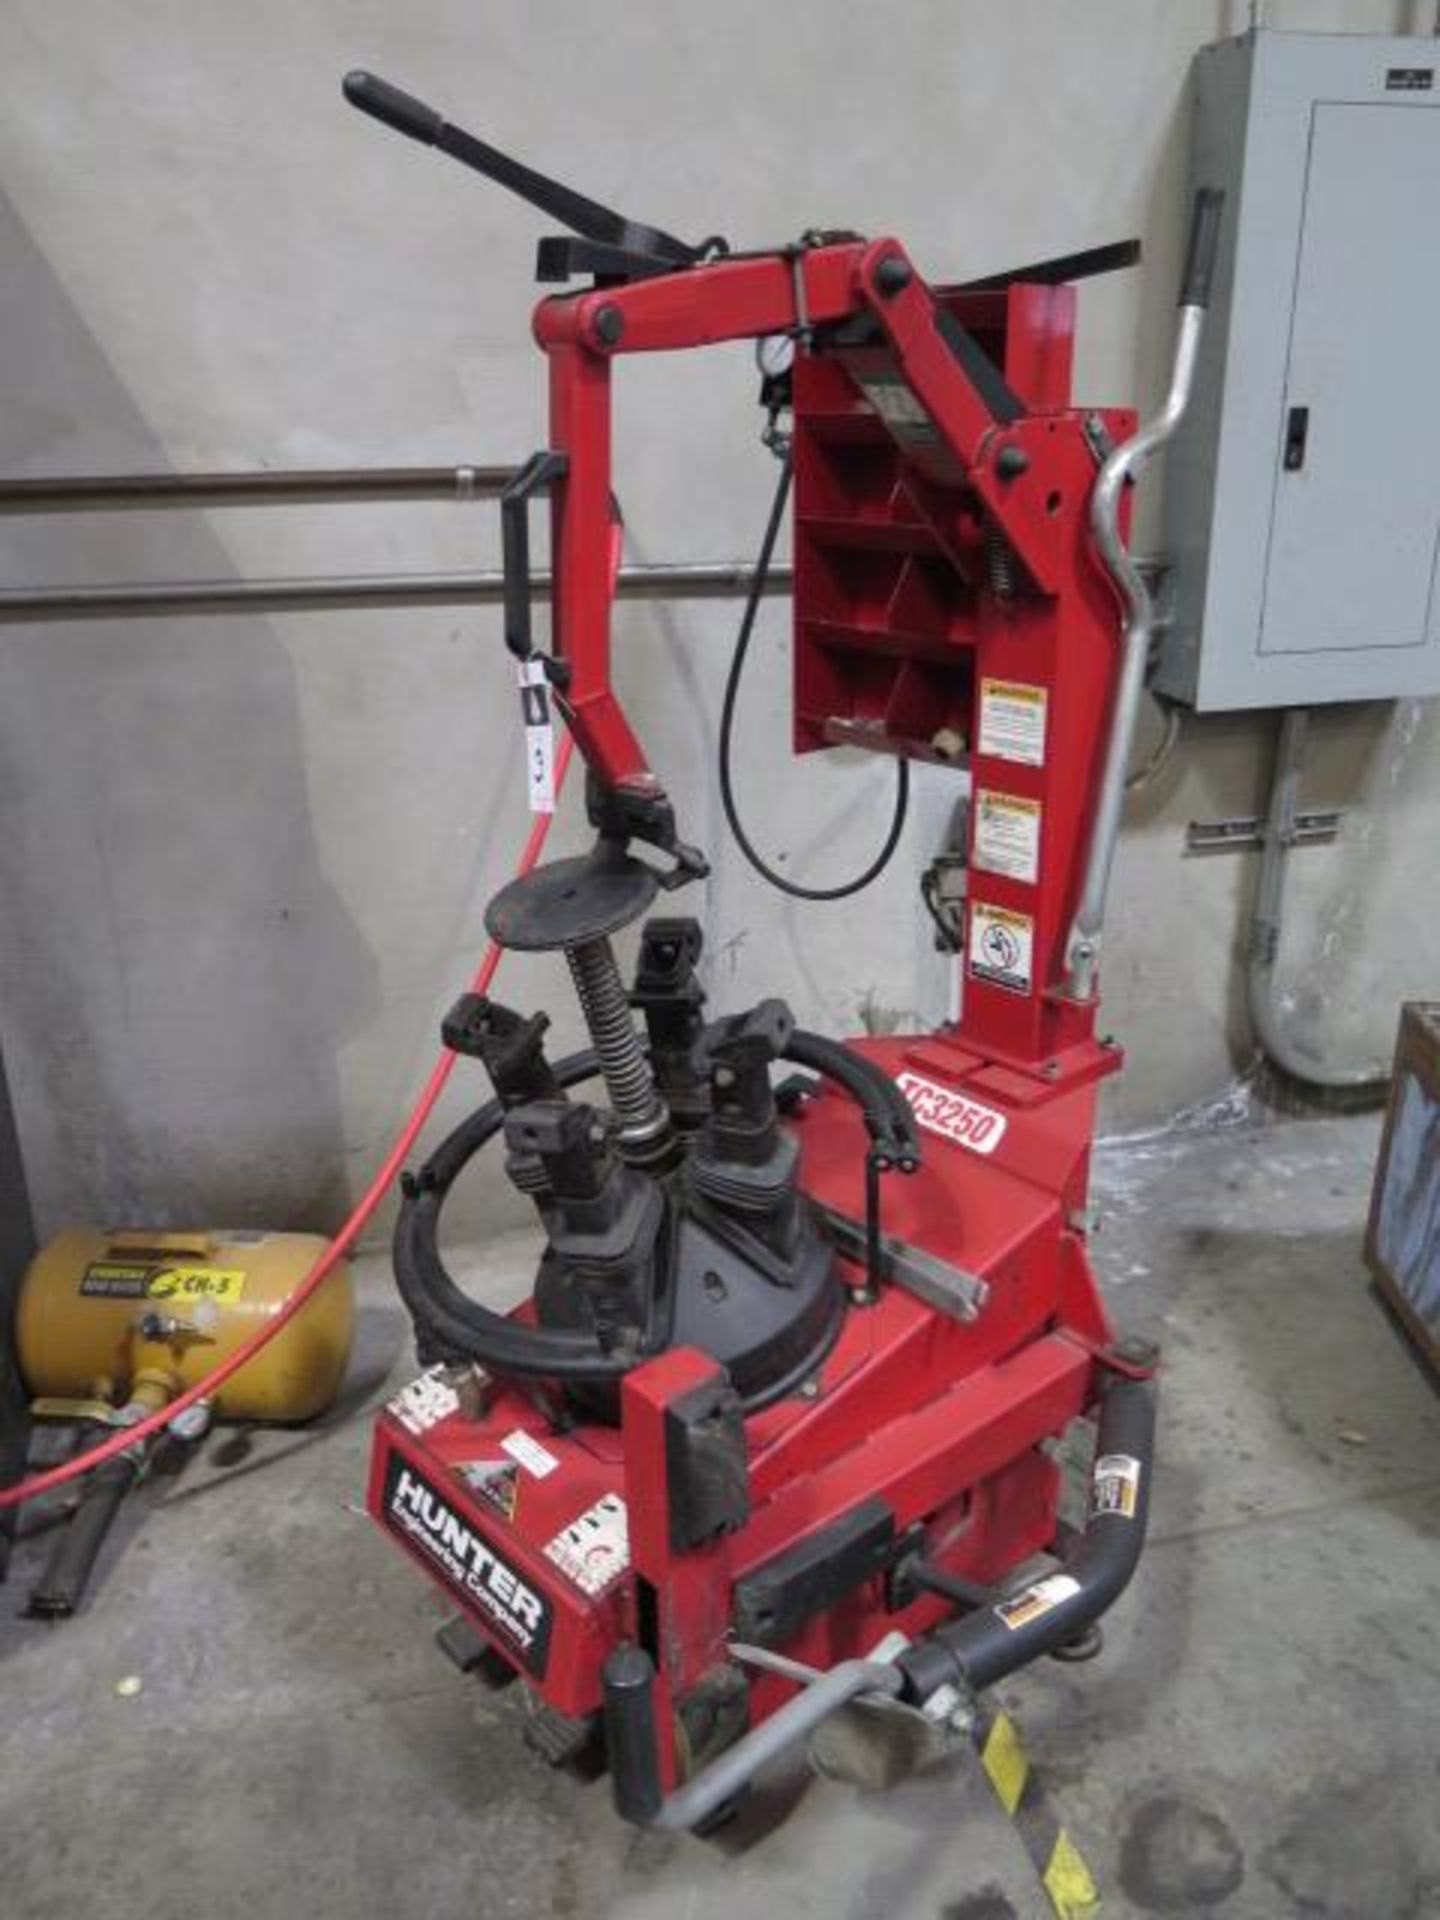 Hunter TC3250 mdl. 102K000 Tire Mounting Machine s/n 16696 (SOLD AS-IS - NO WARRANTY) - Image 2 of 18